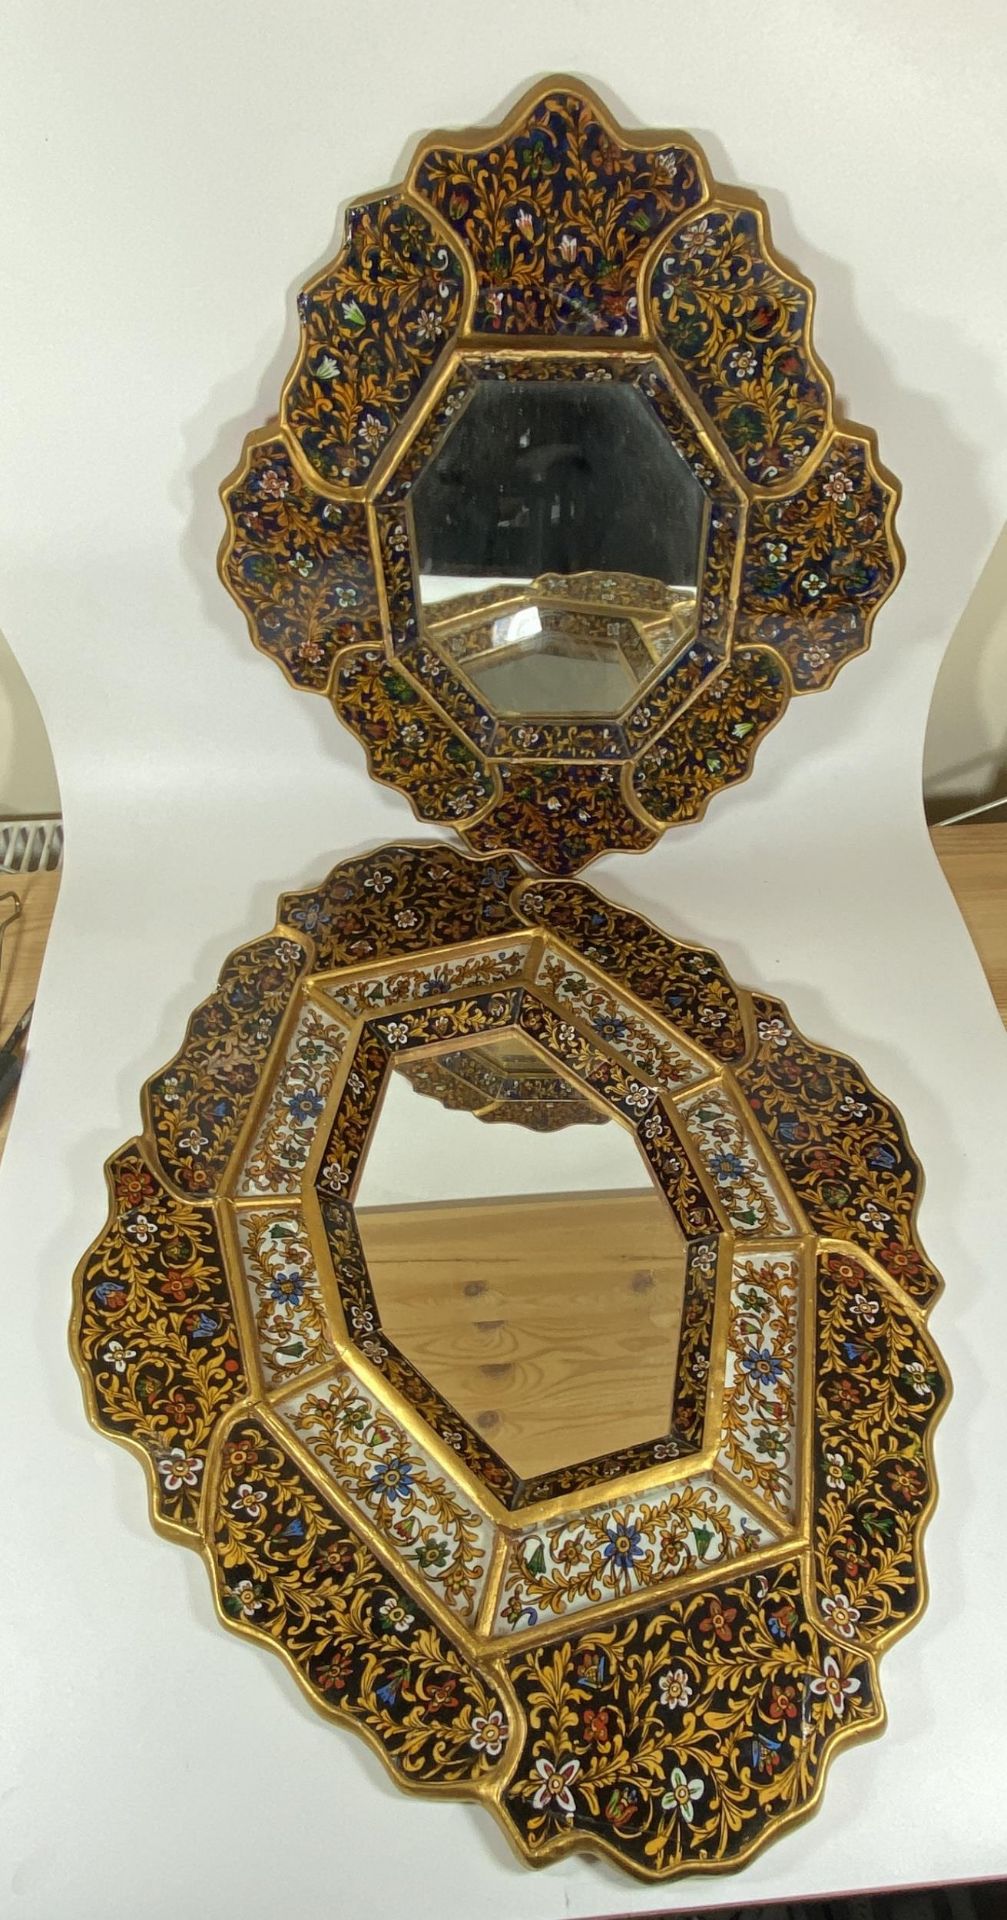 TWO MIDDLE EASTERN STYLE DECORATIVE PANELLED MIRRORS, LARGEST 59 X 46CM